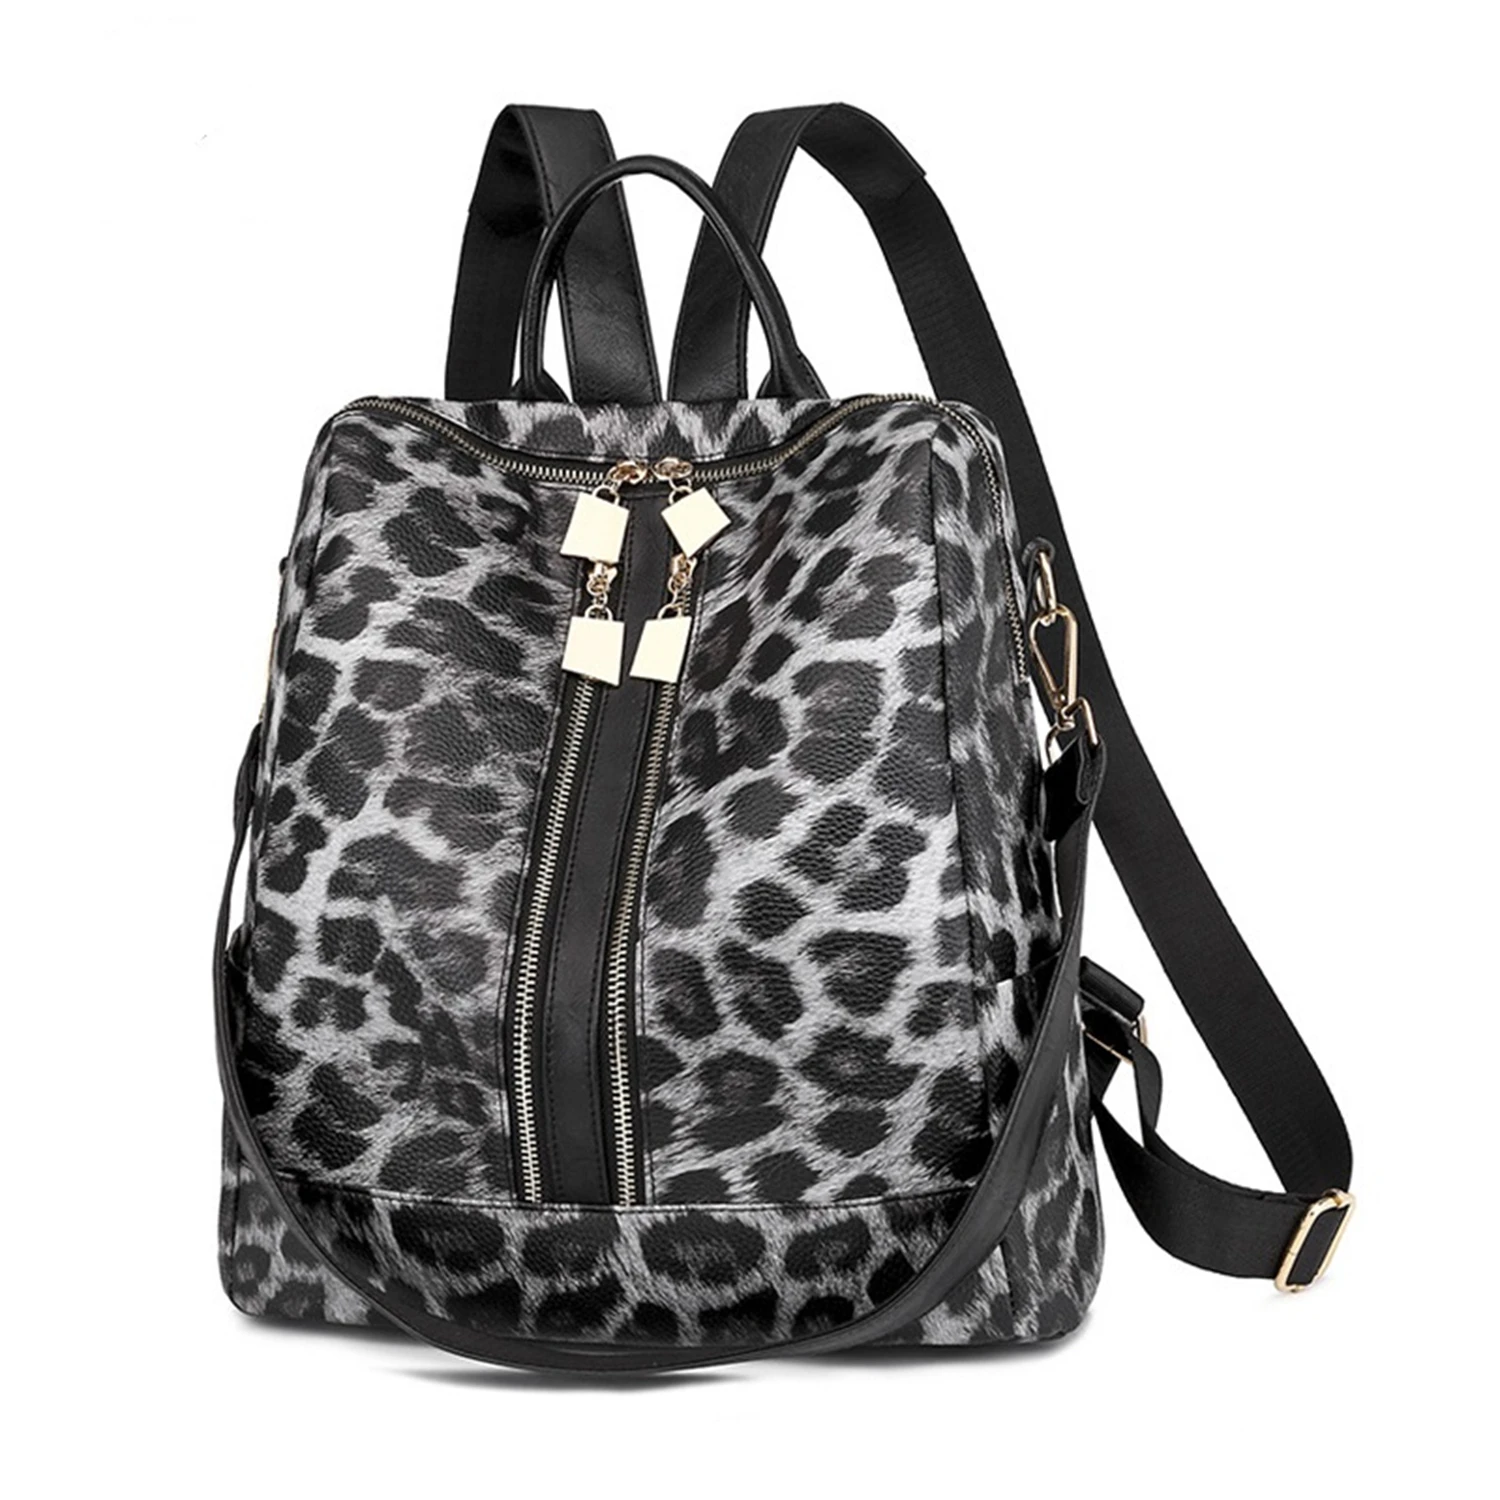 

Women Luxury PU Leather Leopard Cow Diaper Backpack with Purse Waterproof Larger Capacity Backpacks For Travel School Bags